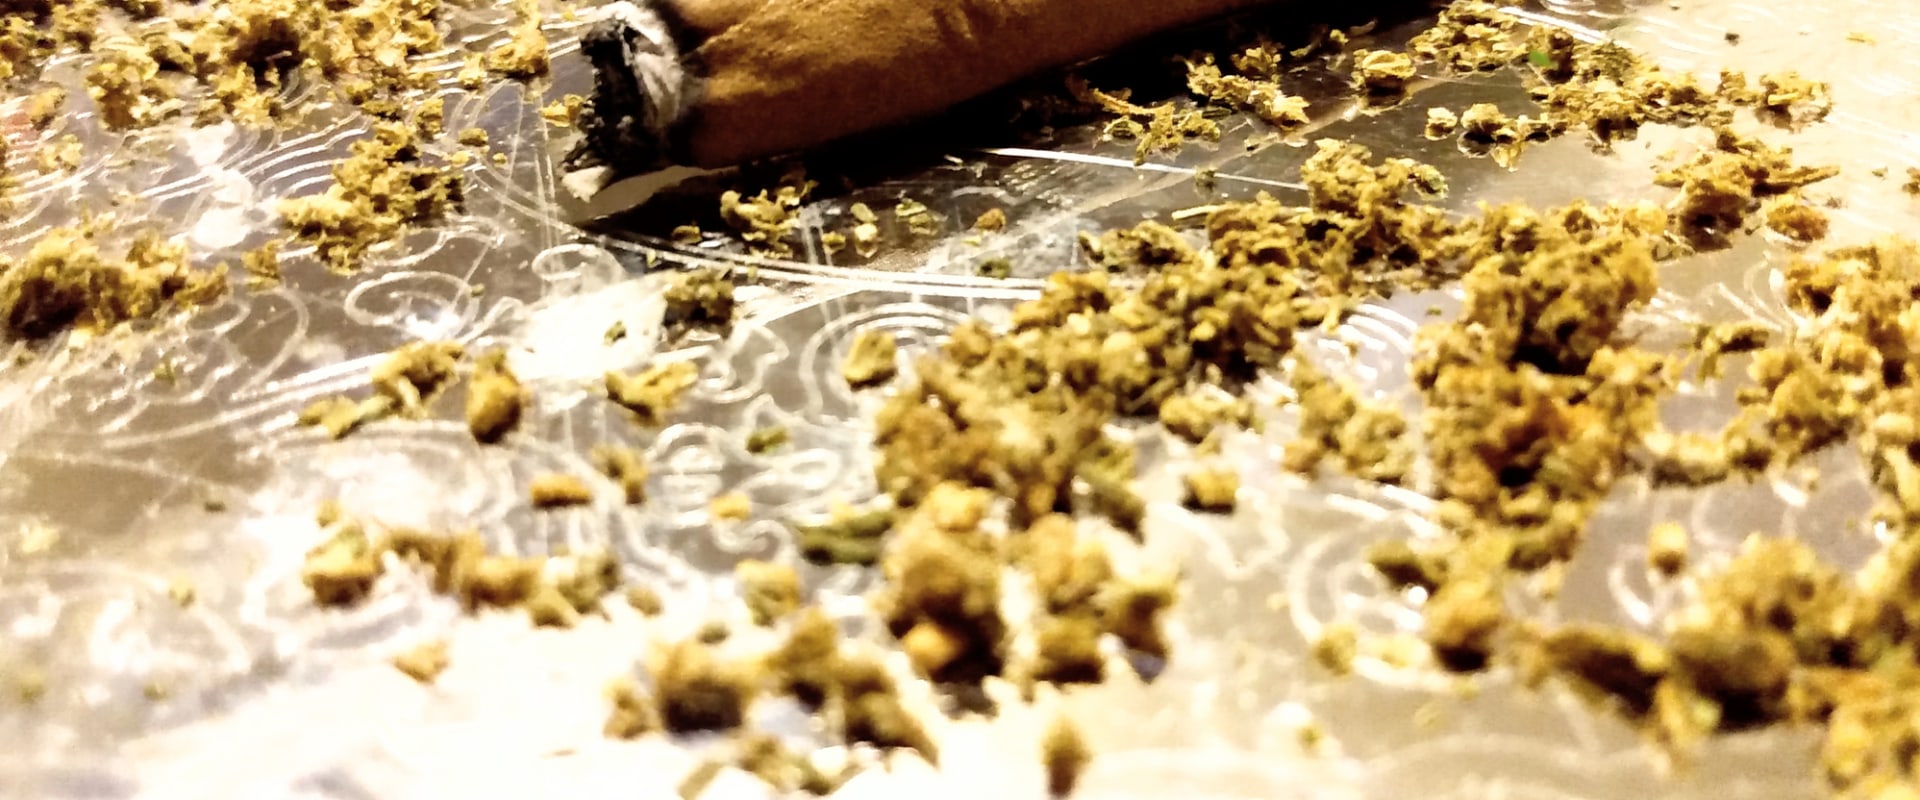 How To Roll A Blunt a Step by Step Guide